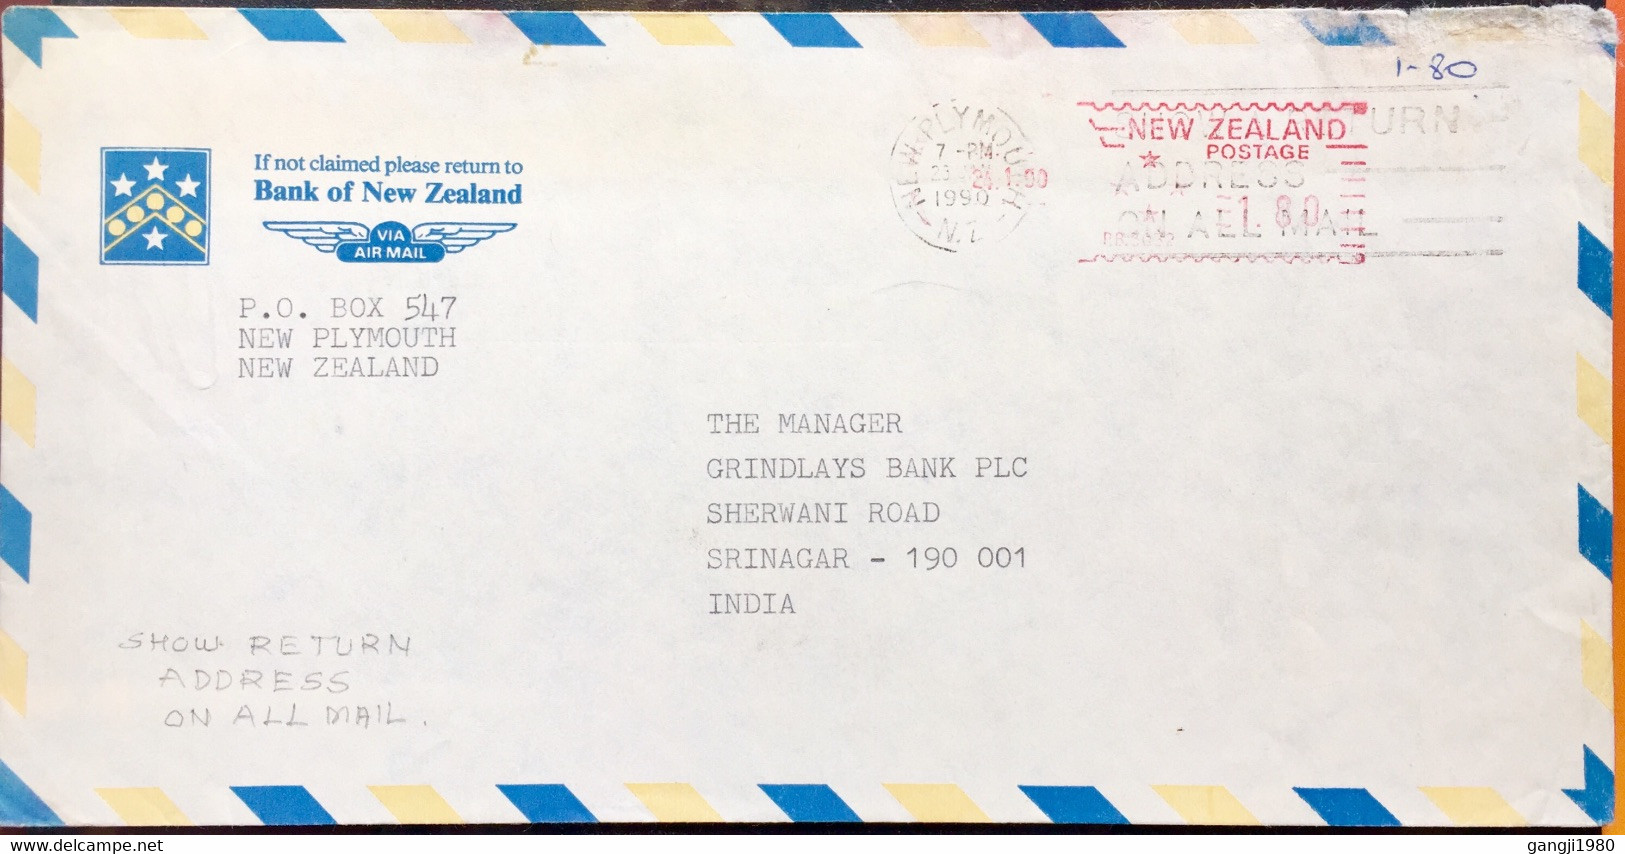 NEW ZEALAND 1990 SHOW RETURN ADDRESS ON ALL MAIL SLOGAN,NEW PLYMOUTH TO INDIA BANK OF NEW ZEALAND METER CANCELLATION - Briefe U. Dokumente